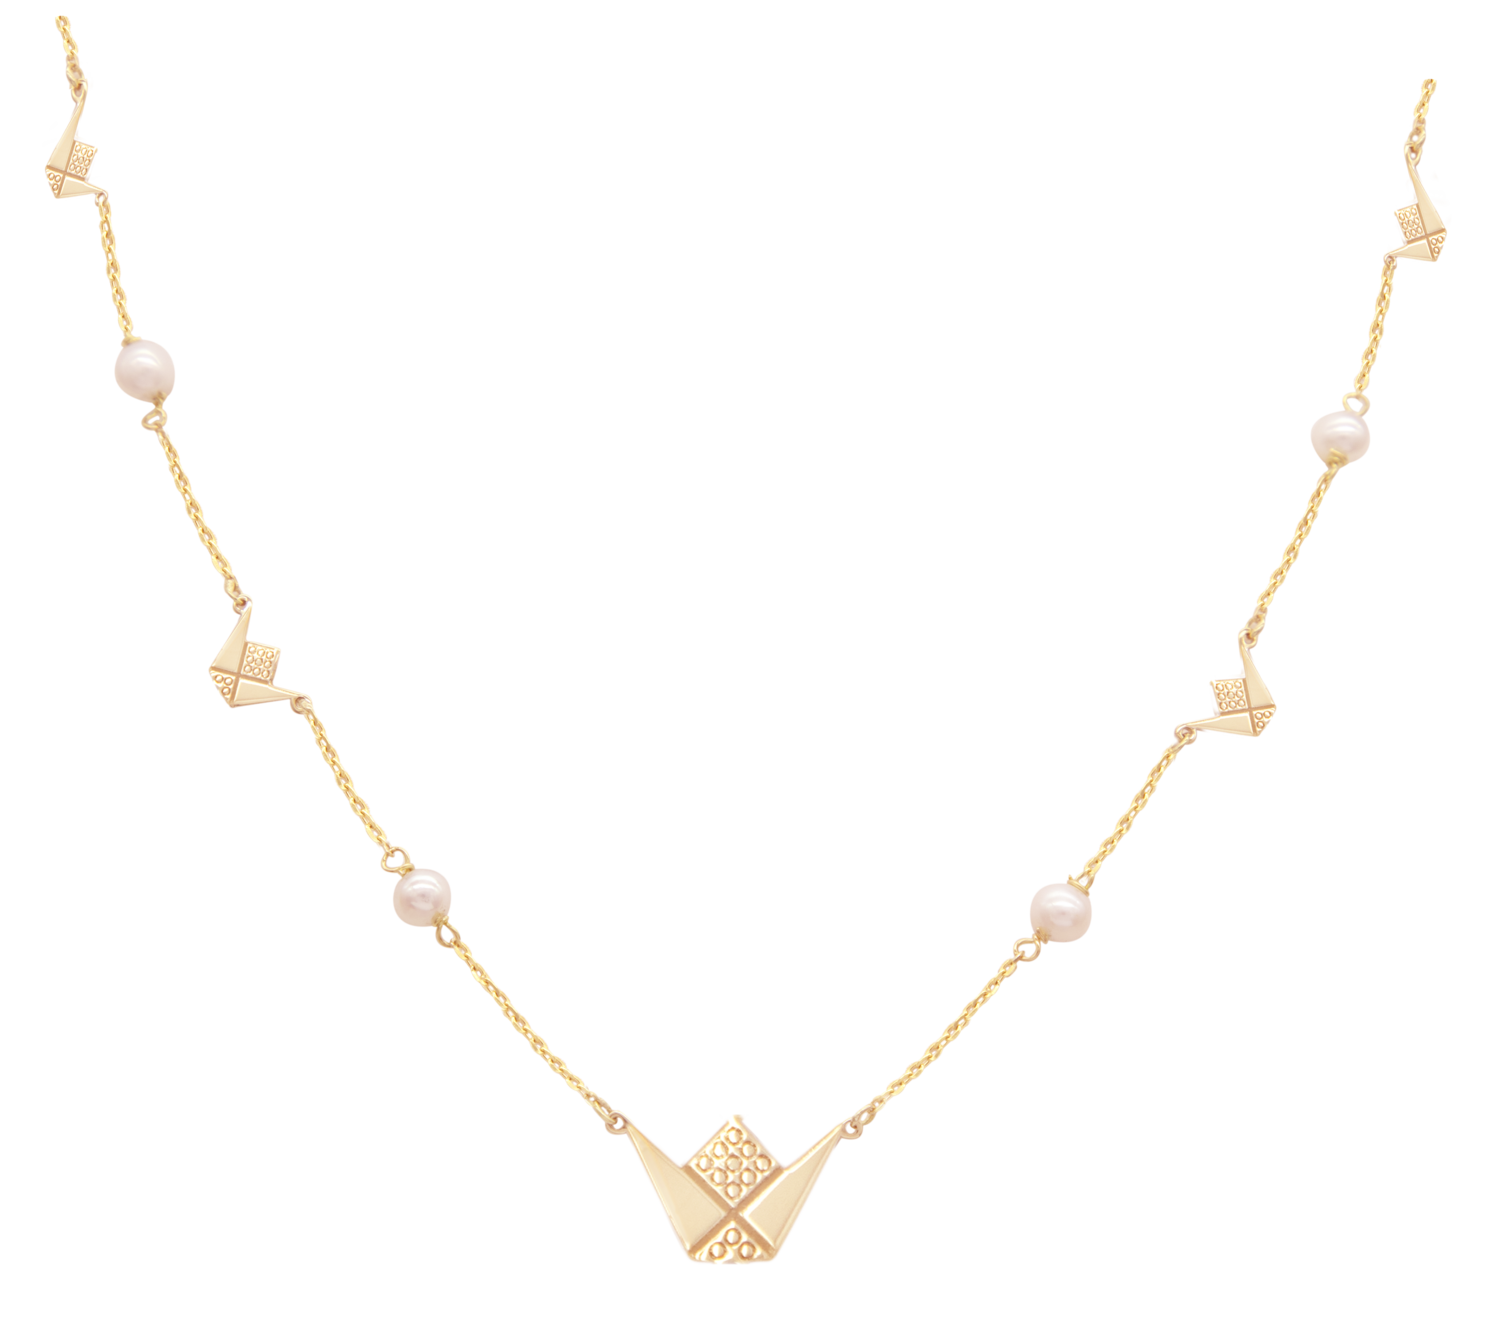 Emblem Gold Necklace with Pearls